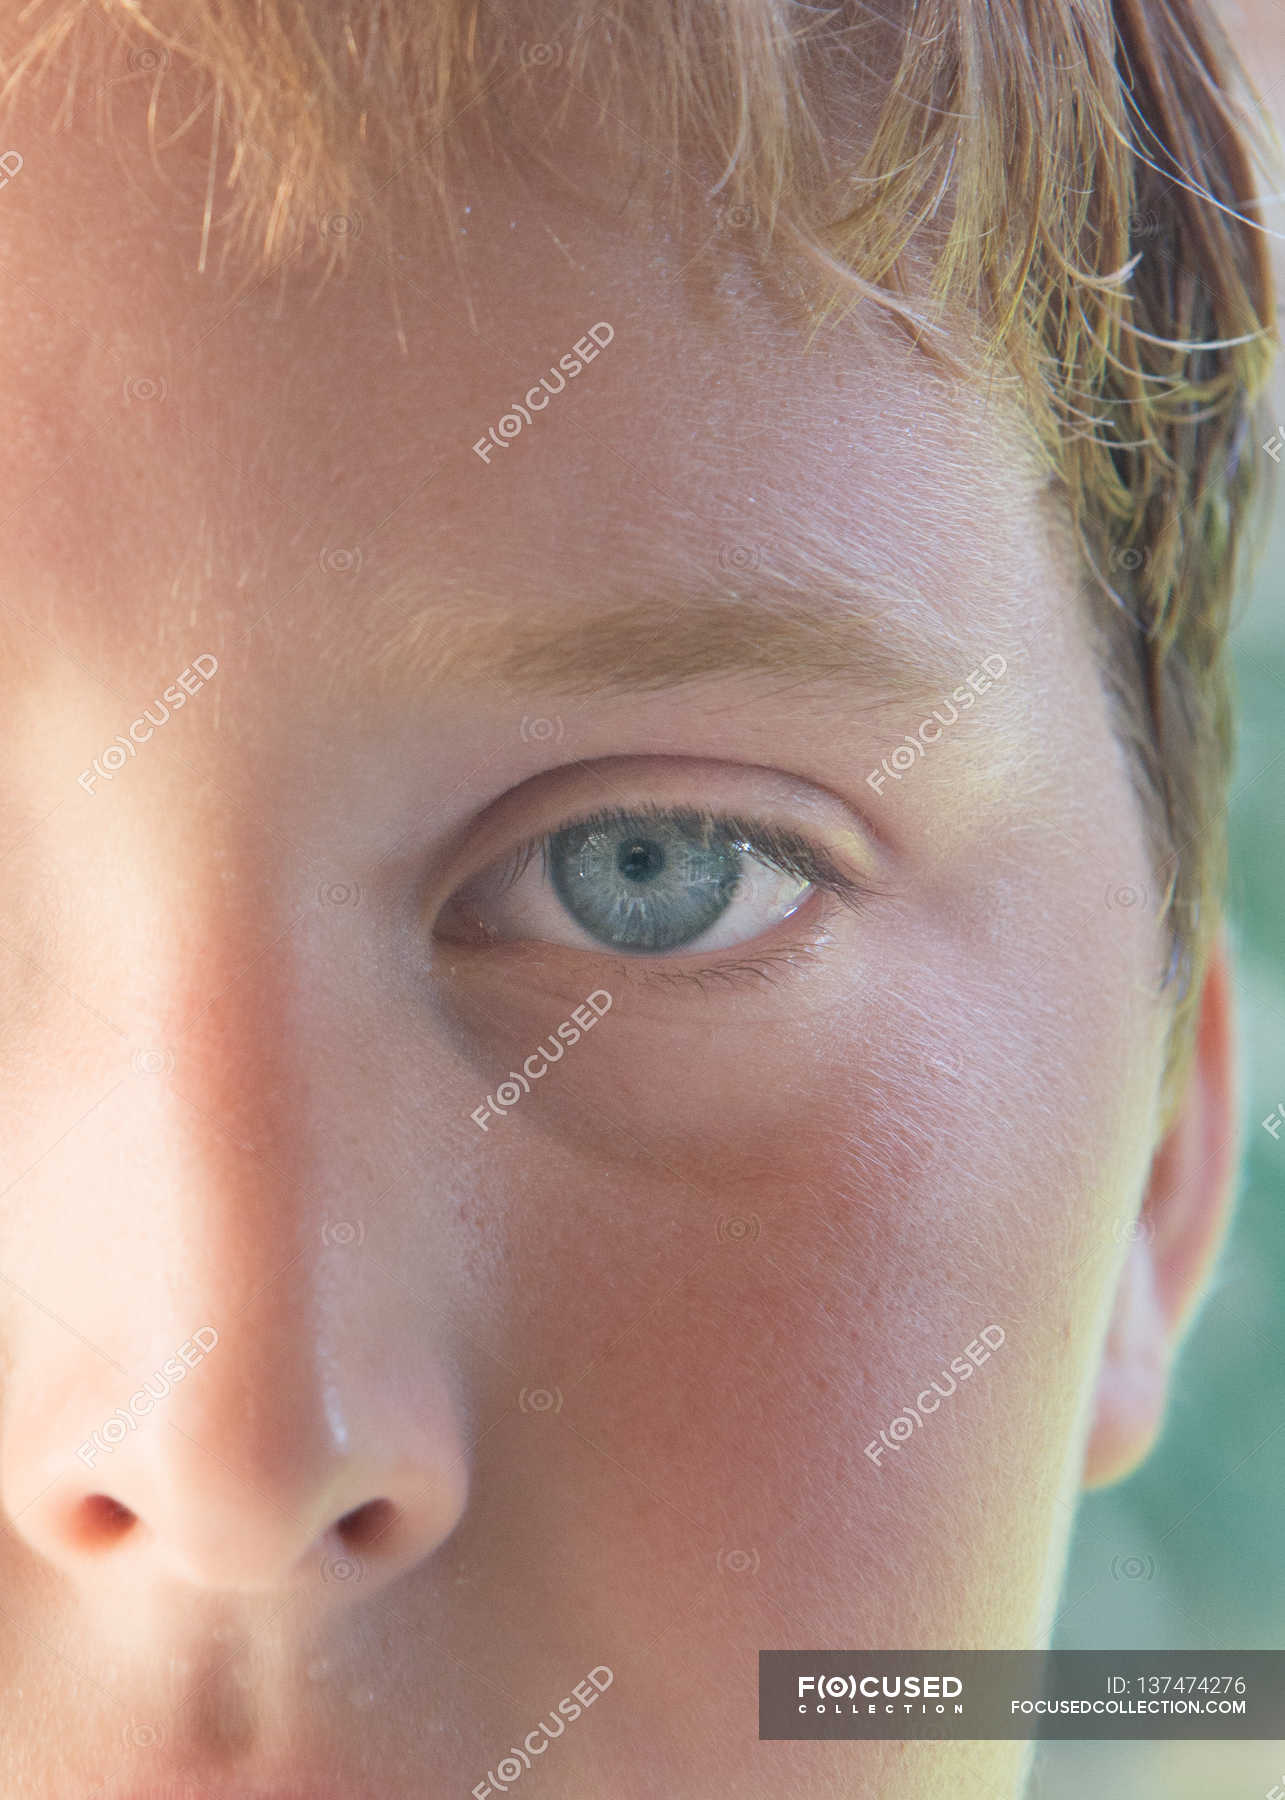 Boy with green eyes — expressionless, attractive - Stock Photo | #137474276